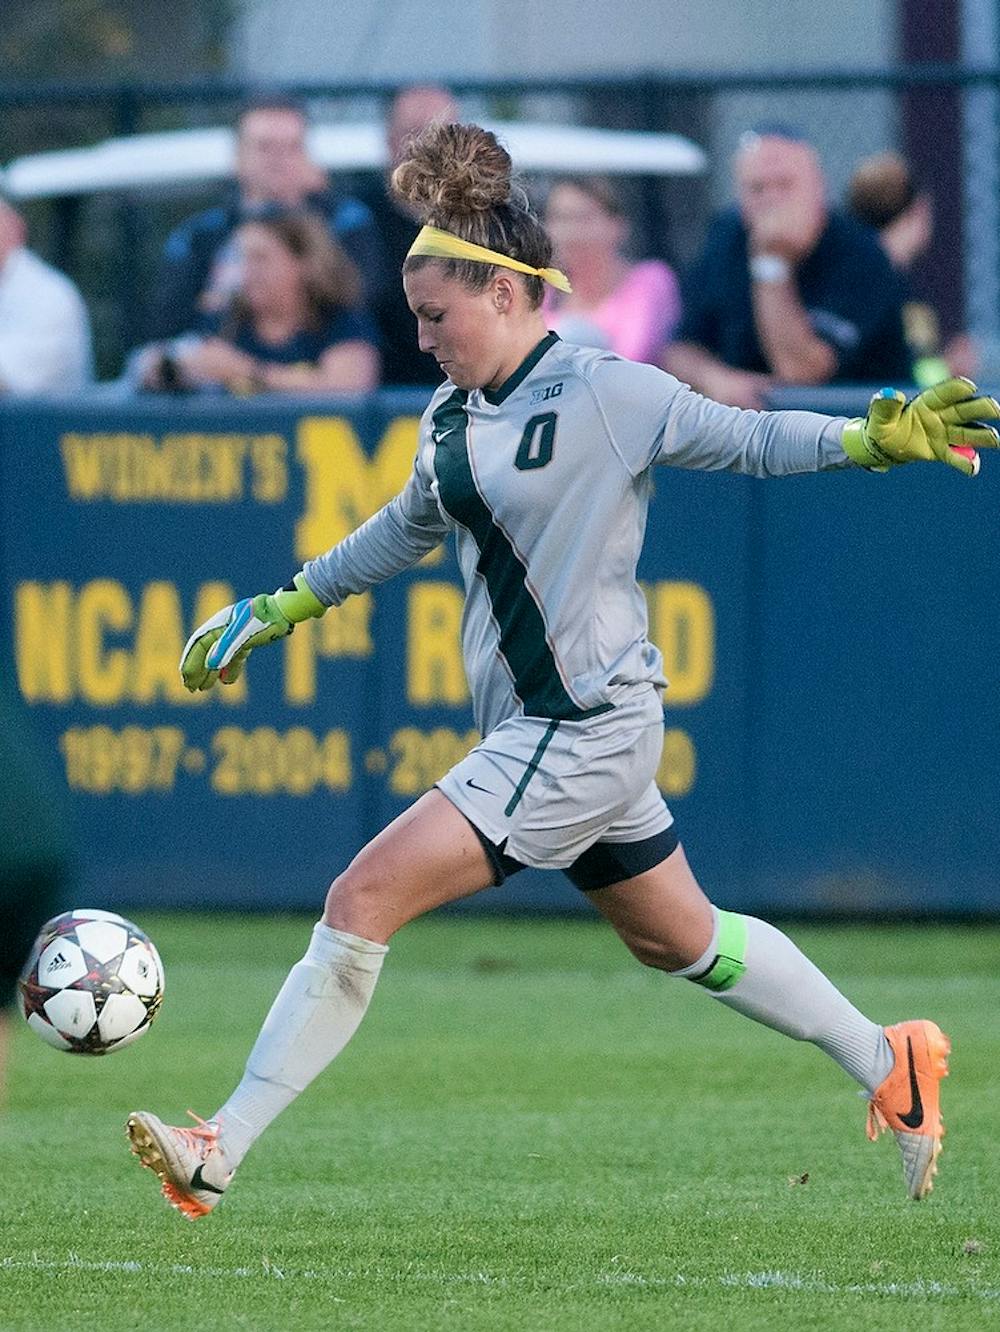 <p>Senior goalie Courtney Clem kicks the ball during the game against Michigan on Sept. 27, 2014, at the U-M Soccer Stadium in Ann Arbor, Mich. The Wolverines defeated the Spartans, 2-1. Jessalyn Tamez/The State News. </p>